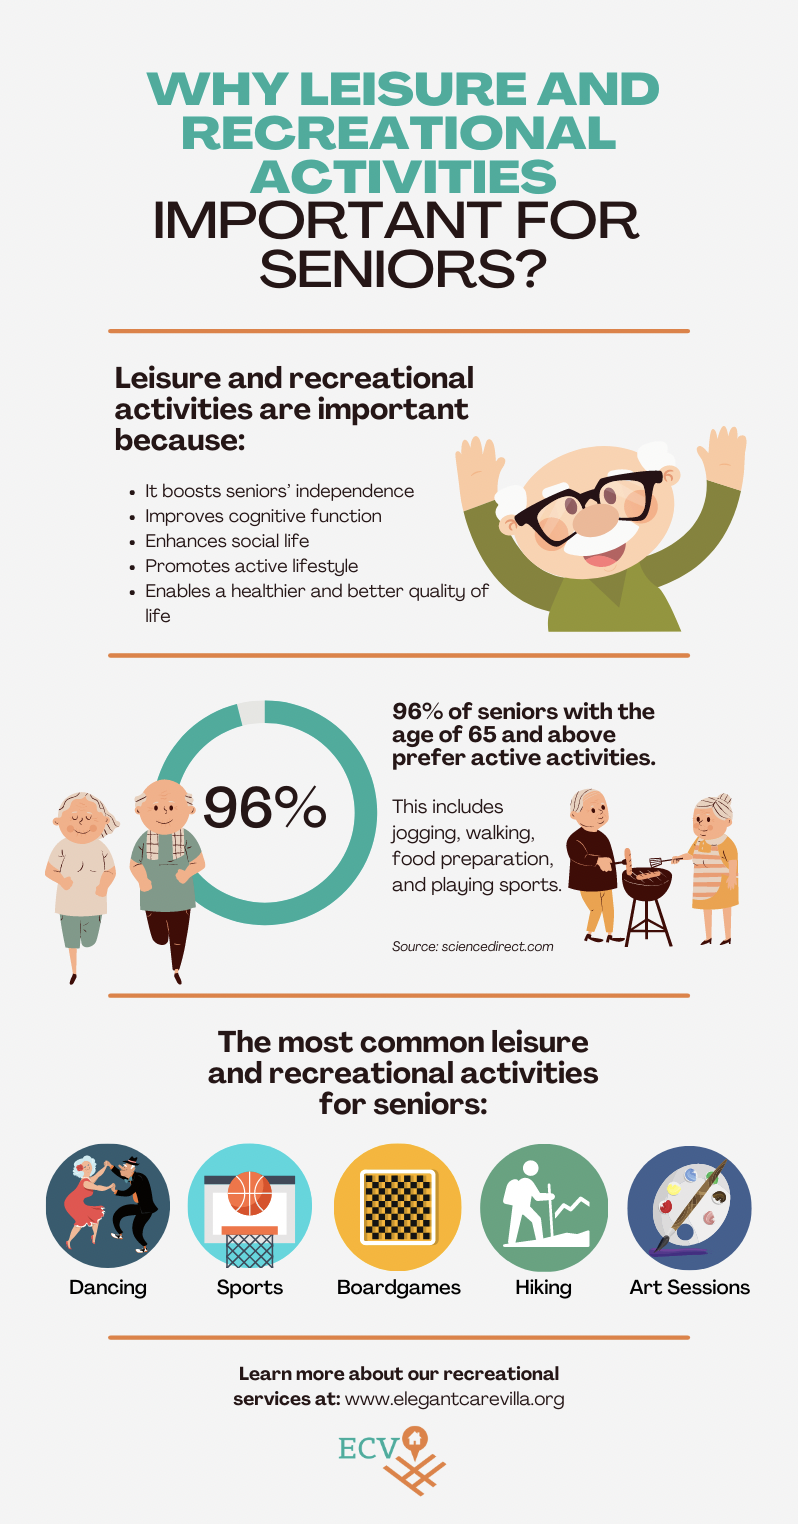 The Importance of Leisure and Recreational Activities for Seniors